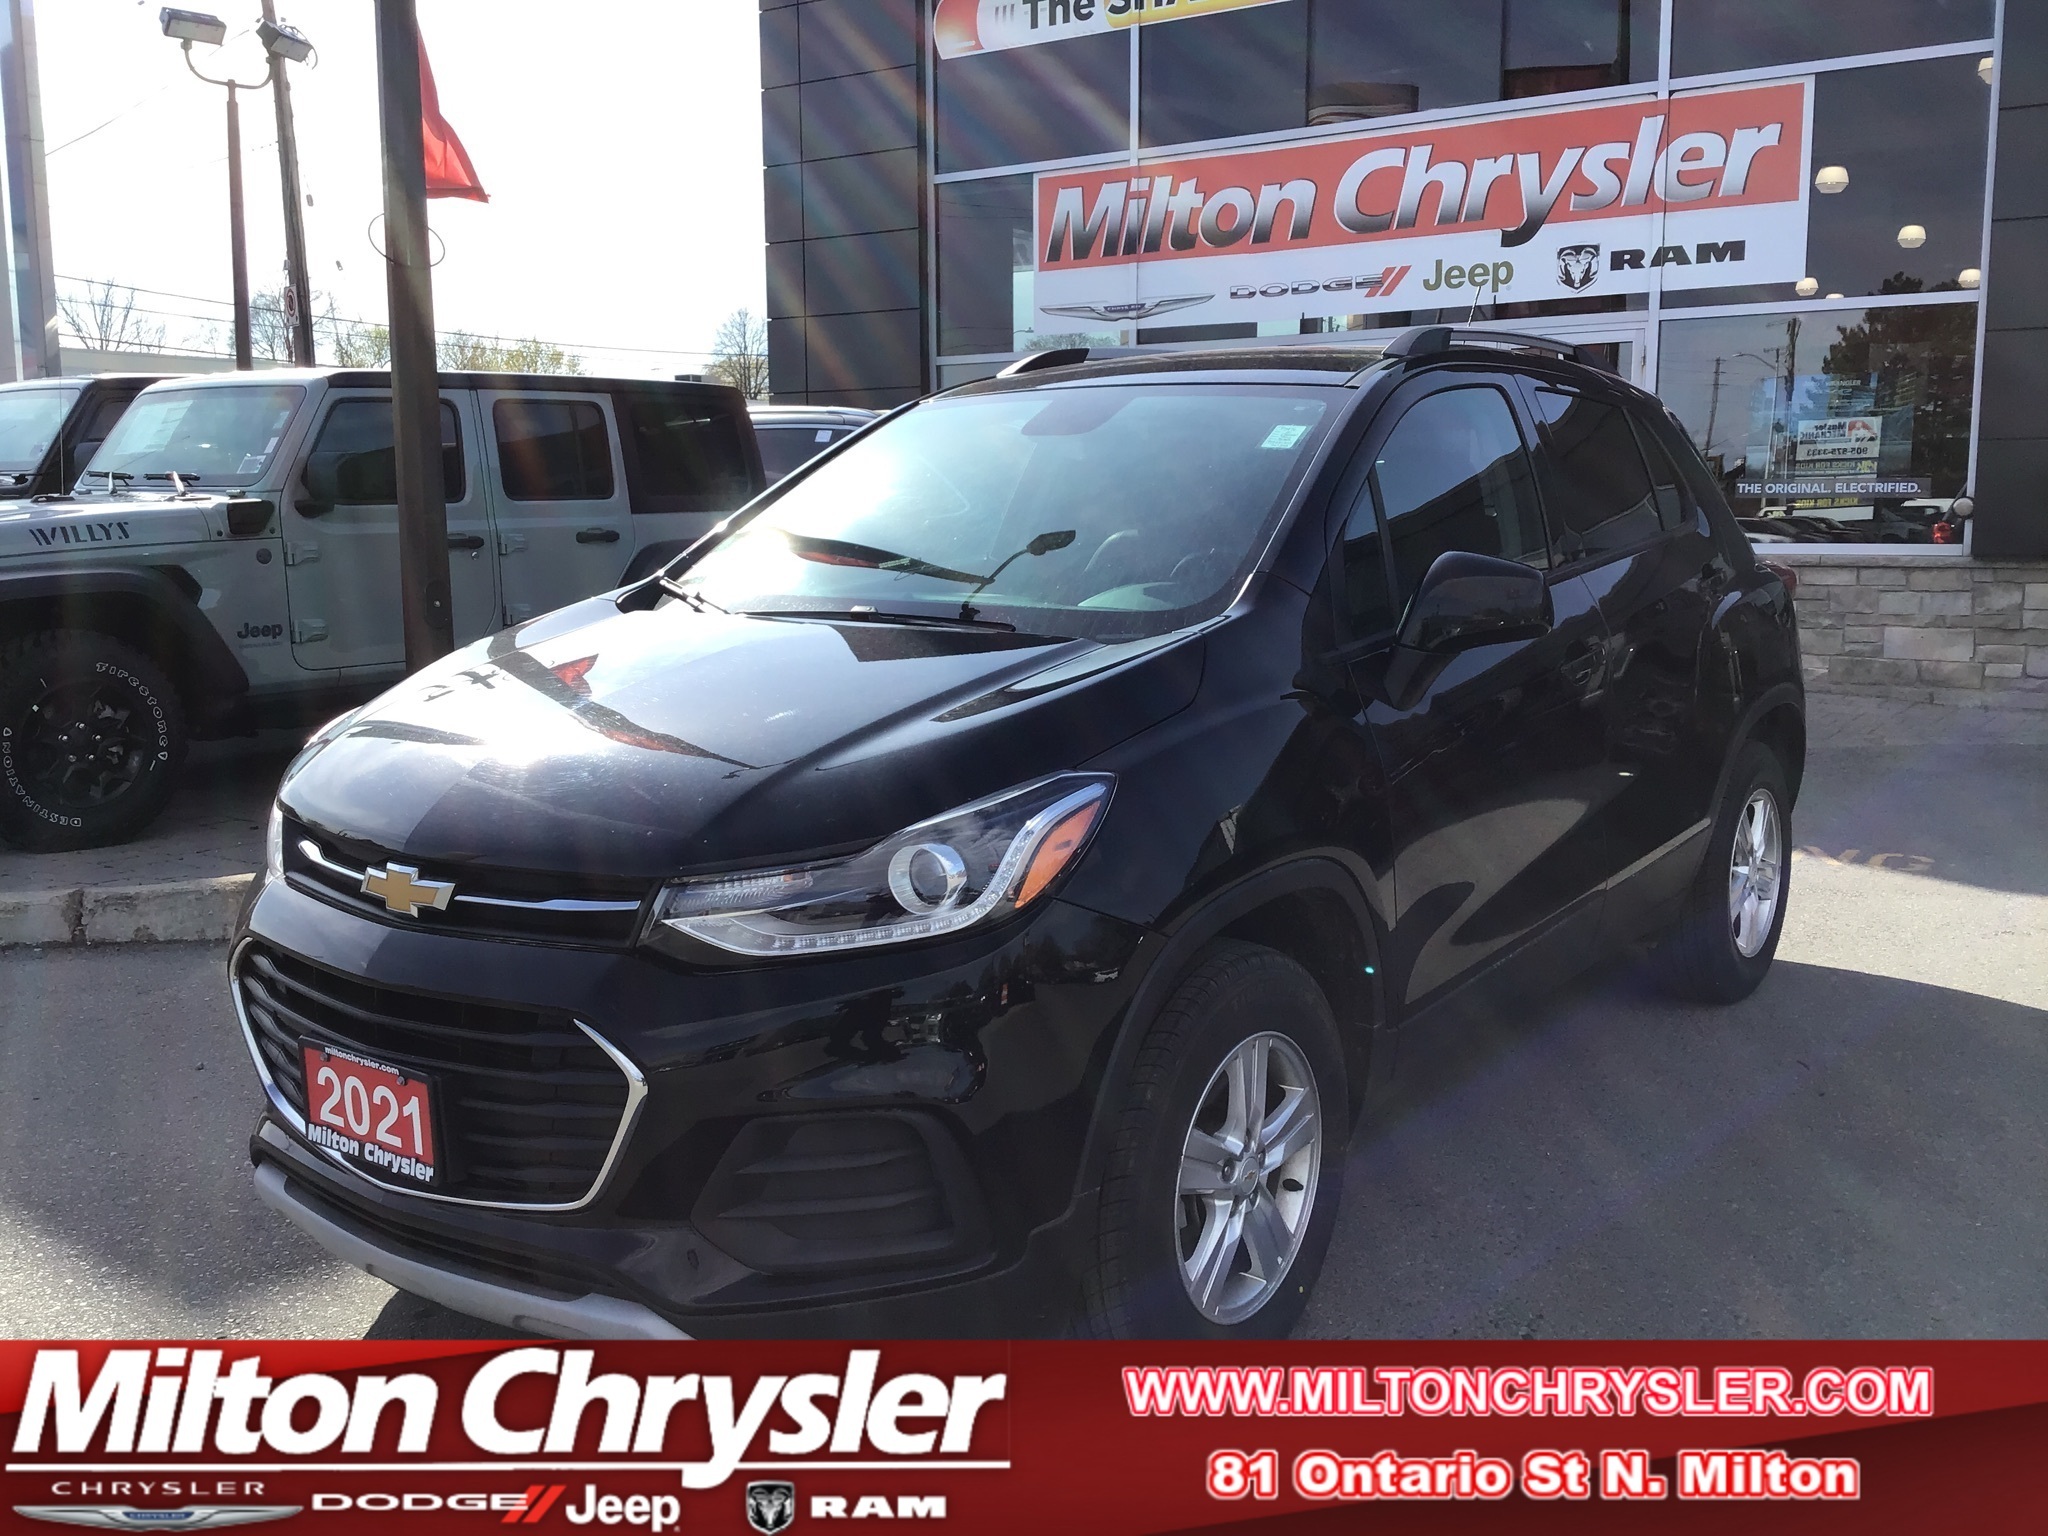 2021 Chevrolet Trax LT AWD|LEATHER|HEATED SEATS|BACK UP CAMERA